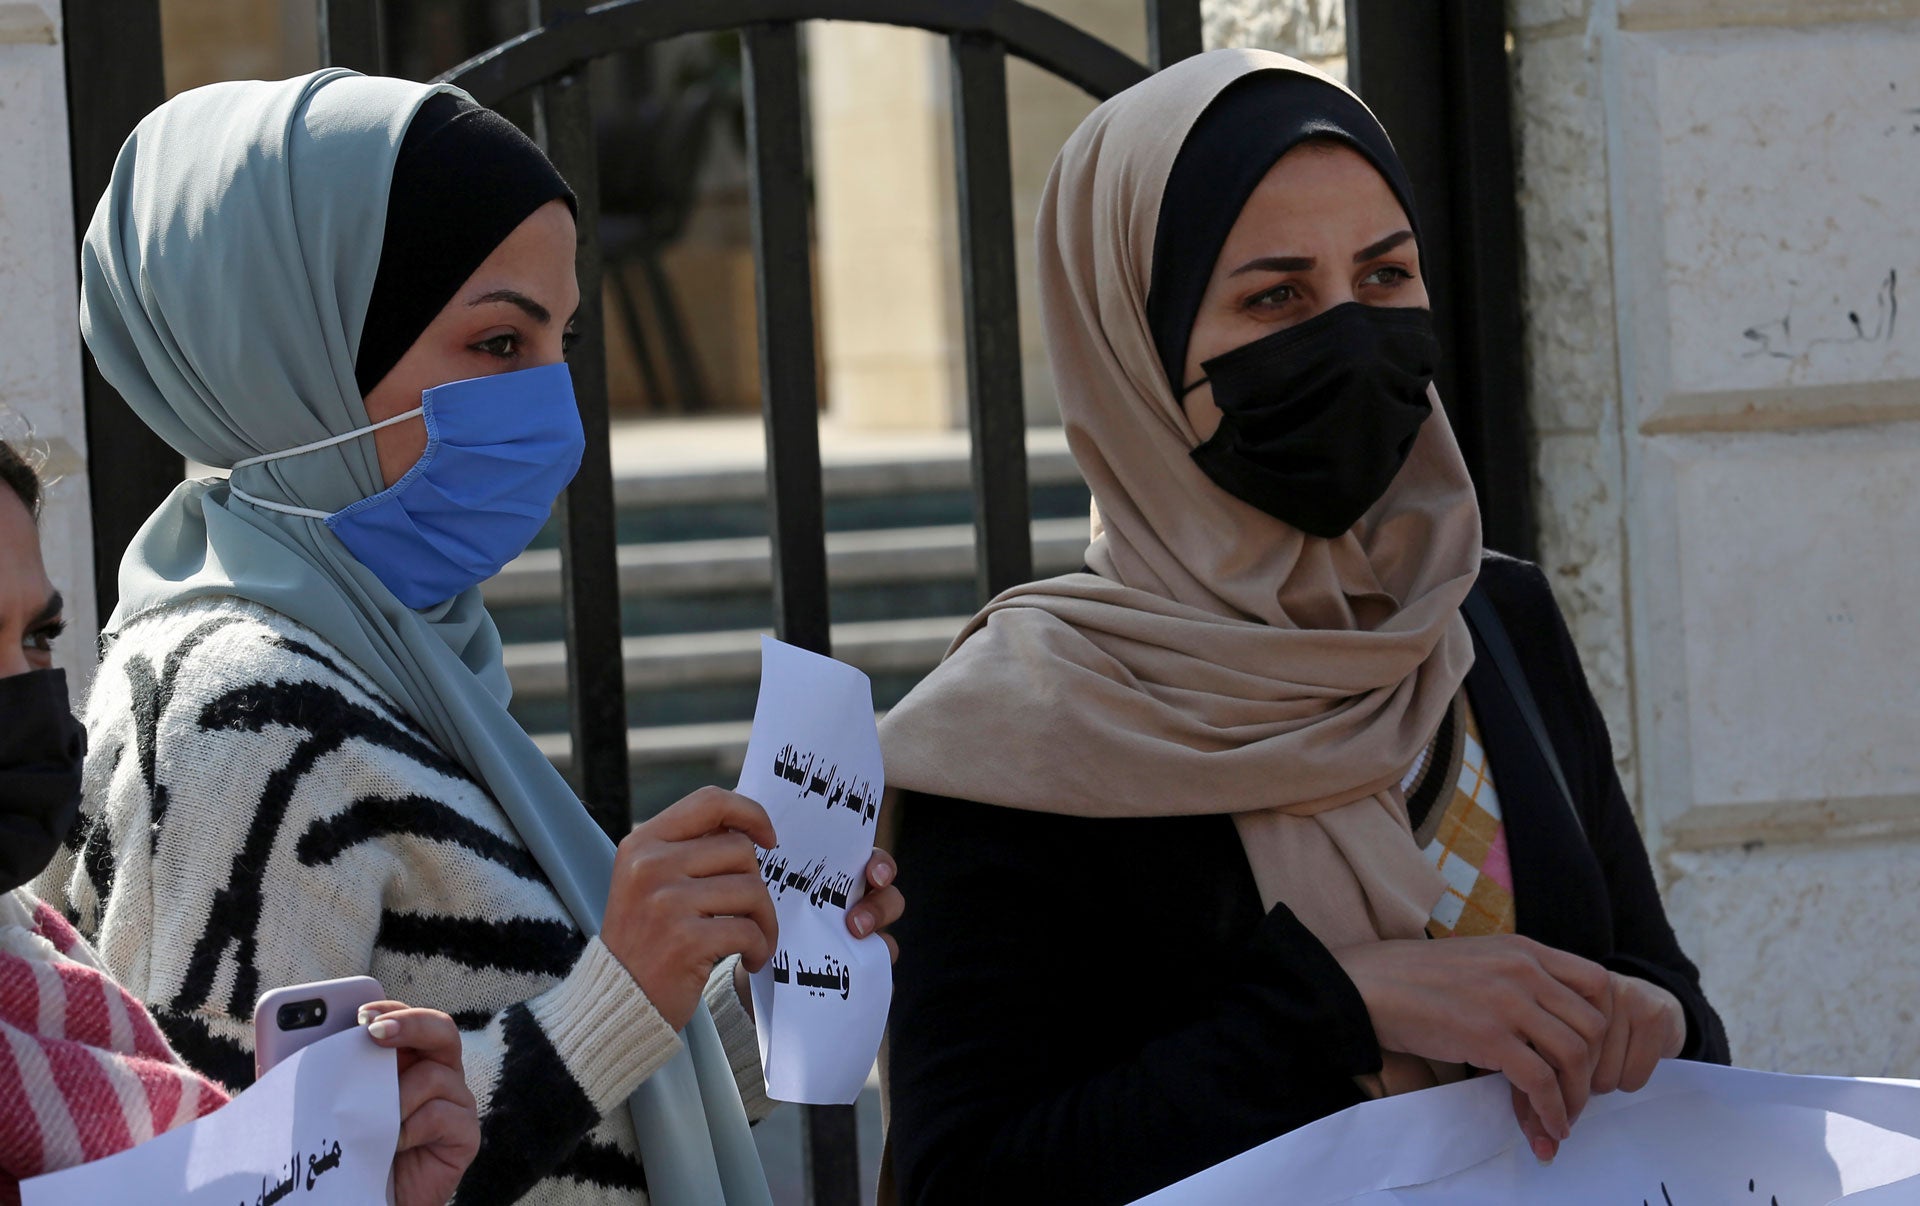 Women hold signs during a protest against the decision by Gaza's Supreme Judicial Council banning women from movement in and out of the Gaza Strip without the permission of her "guardian," in Gaza City, February 16, 2021. 